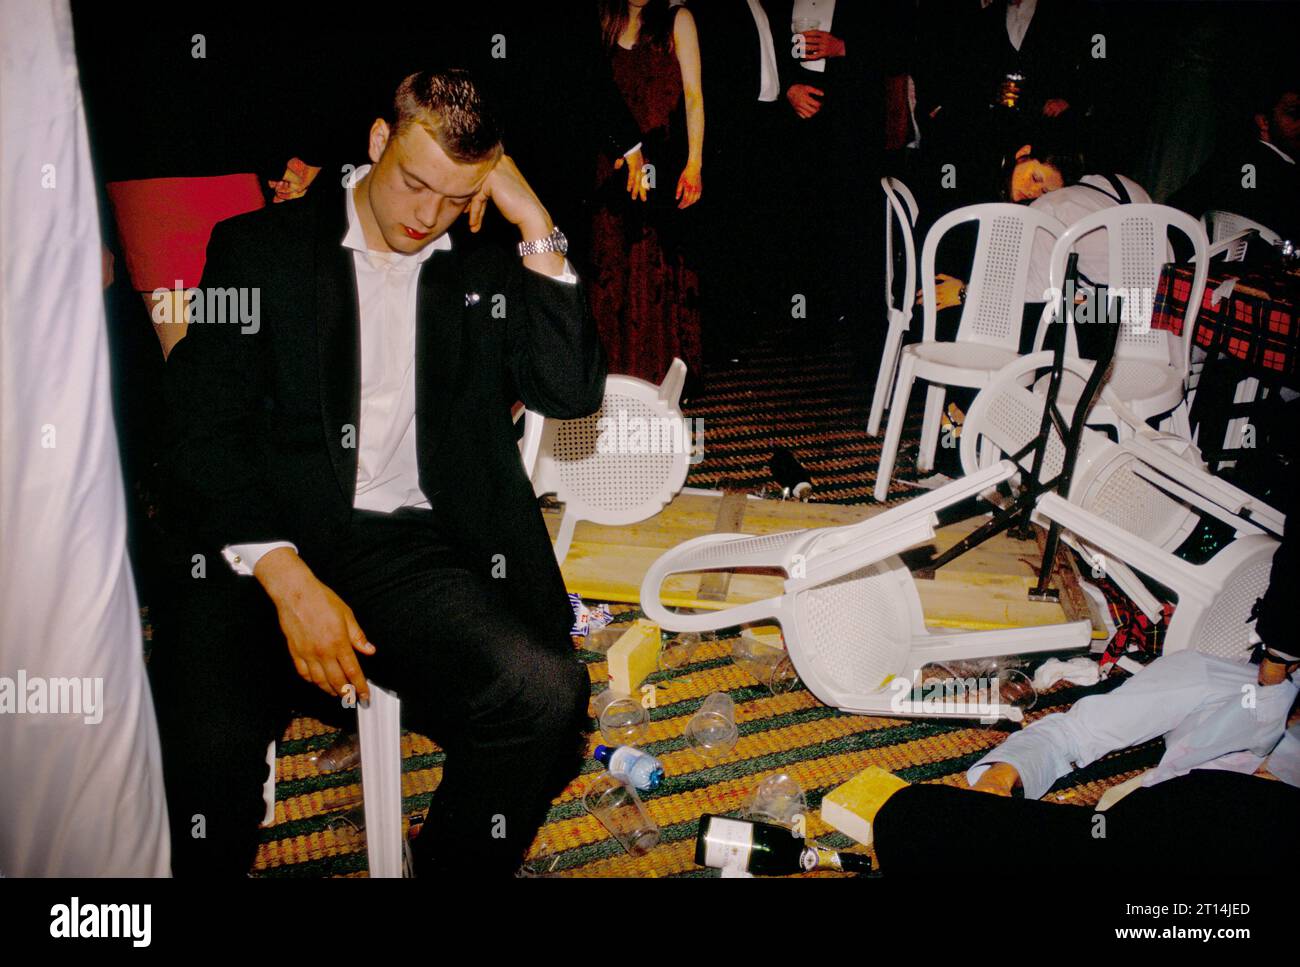 Alcohol abuse, drinking culture male students 1990s UK. A male tired and drunk student, exhausted and asleep at the end of the year annual summer May Ball. Another drunk student lies dead to the world amongst the over turned plastic chairs and tables. Cirencester Royal Agricultural College, Cirencester Gloucestershire, England, circa May 1995. HOMER SYKES Stock Photo